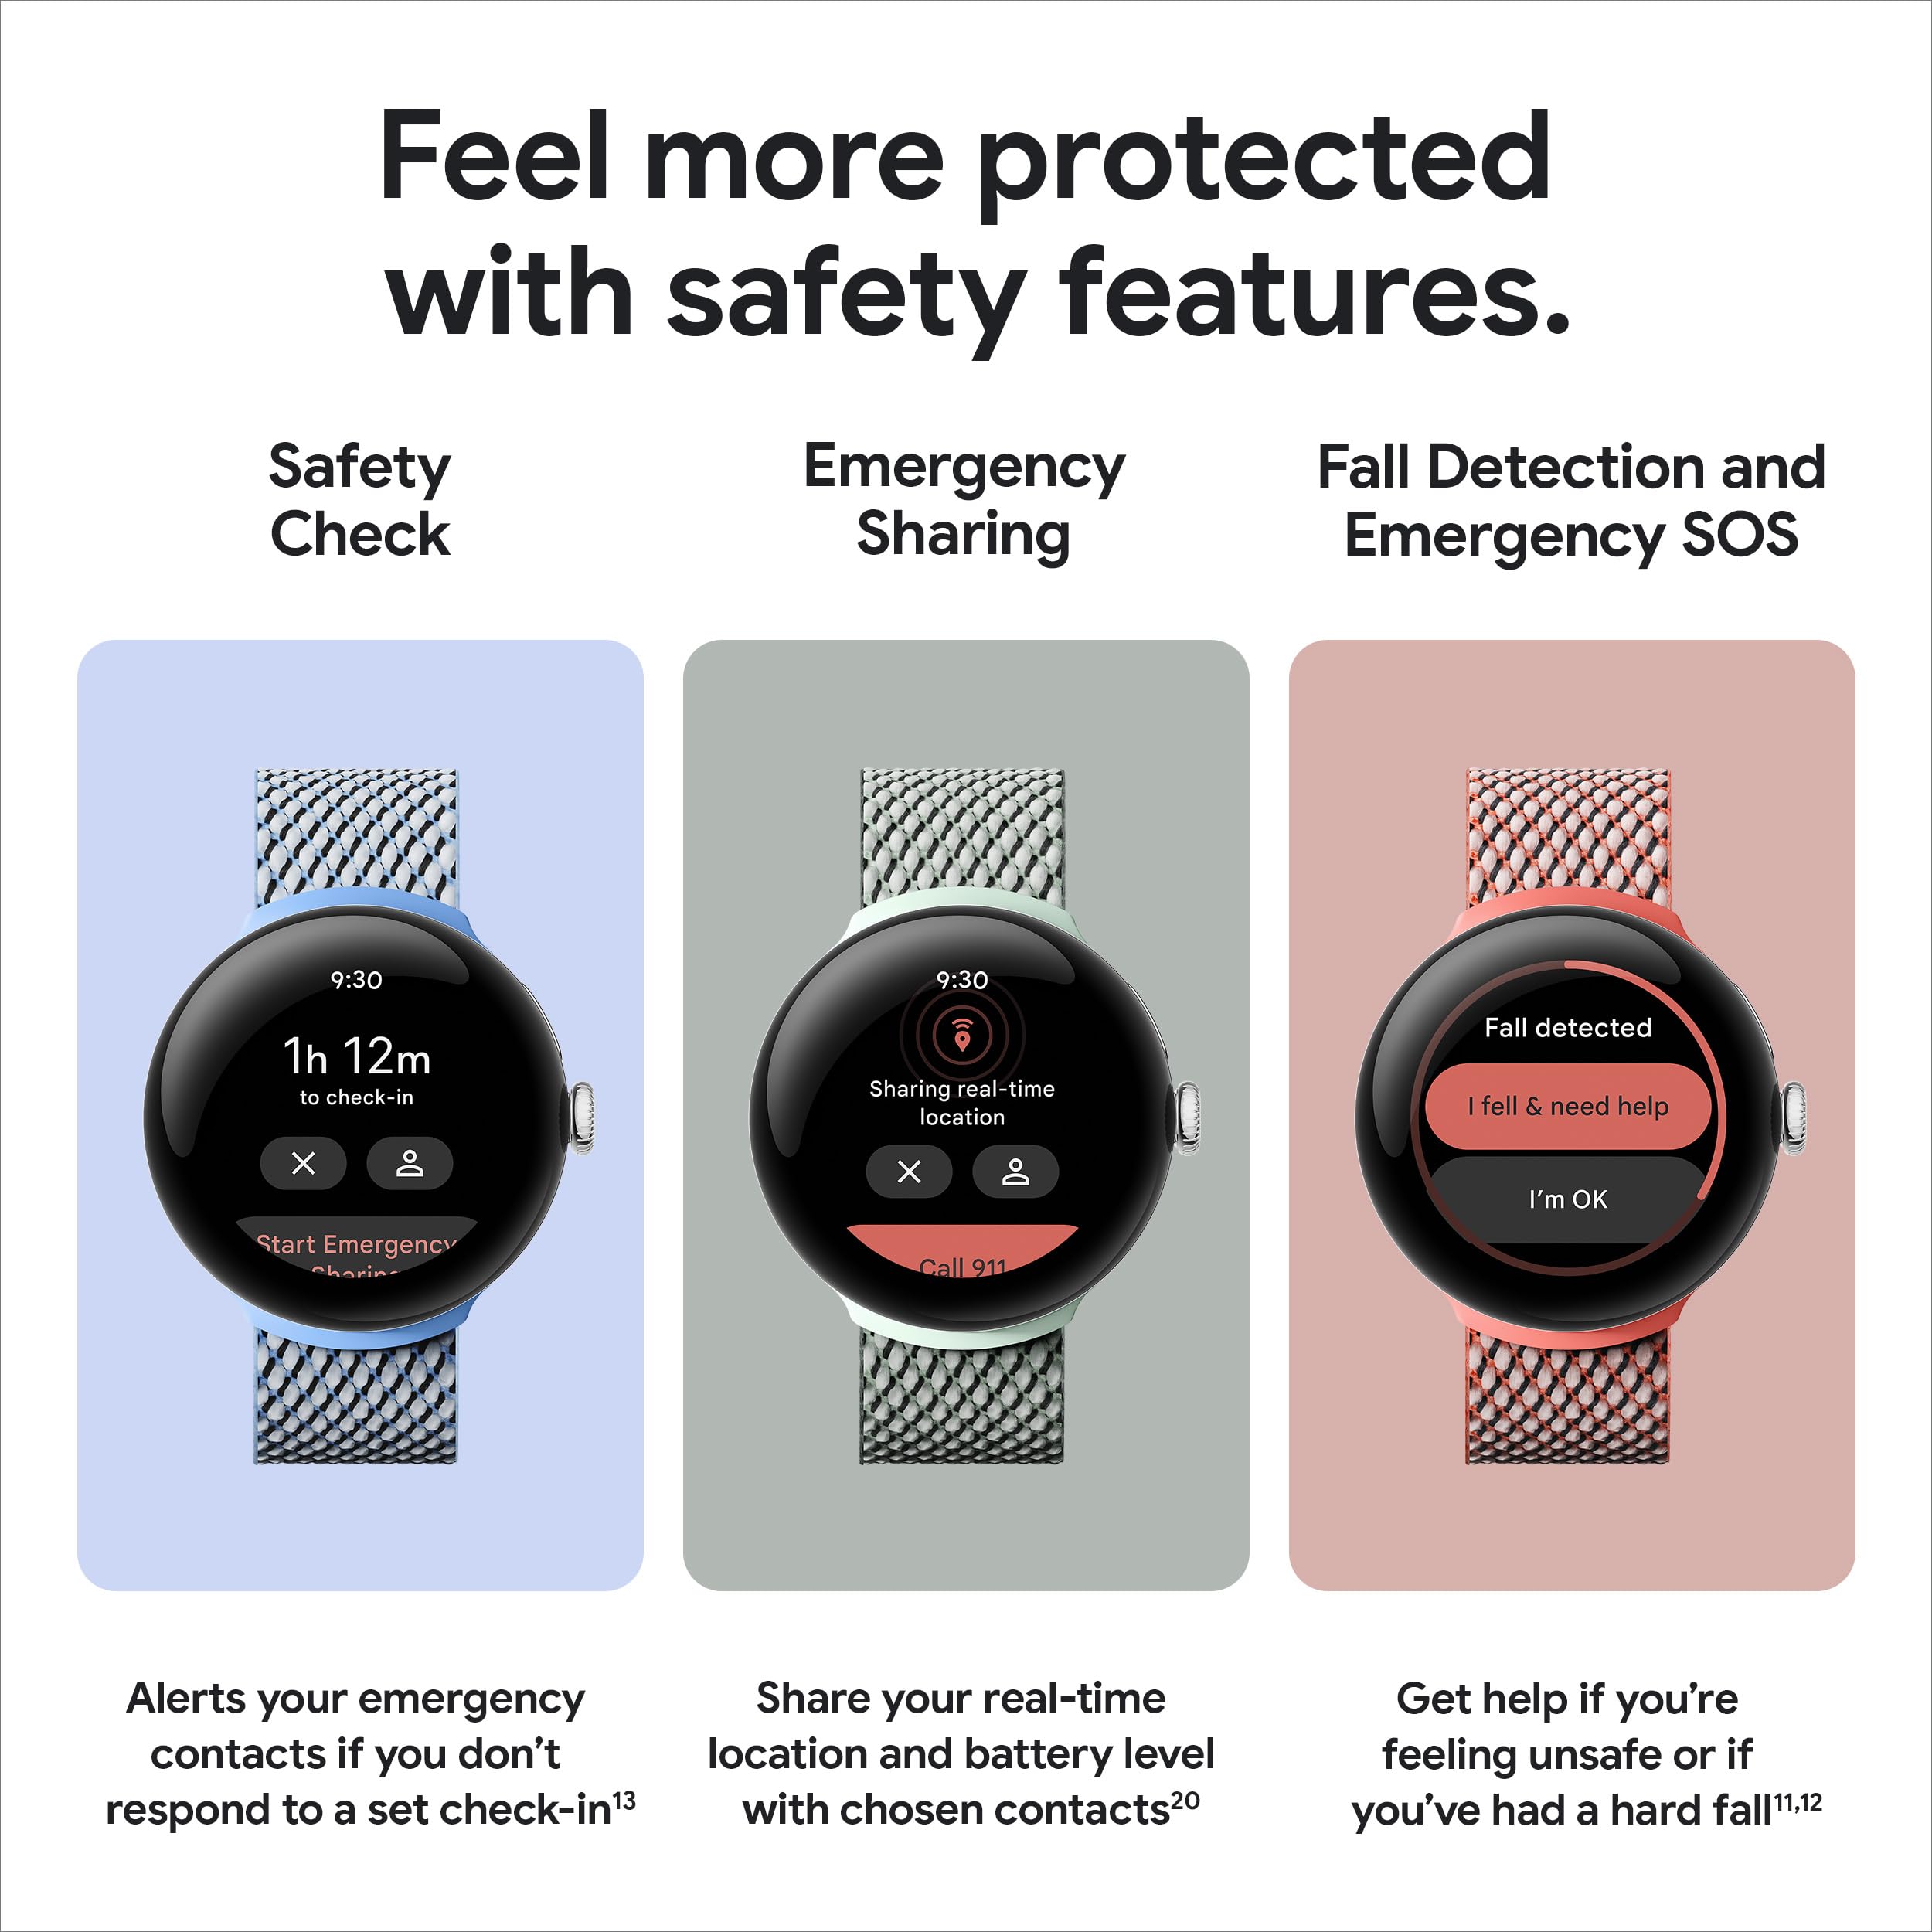 Google Pixel Watch 2 with the Best of Fitbit and Google - Heart Rate Tracking, Stress Management, Safety Features - Android Smartwatch - Matte Black Aluminum Case - Obsidian Active Band - Wi-Fi